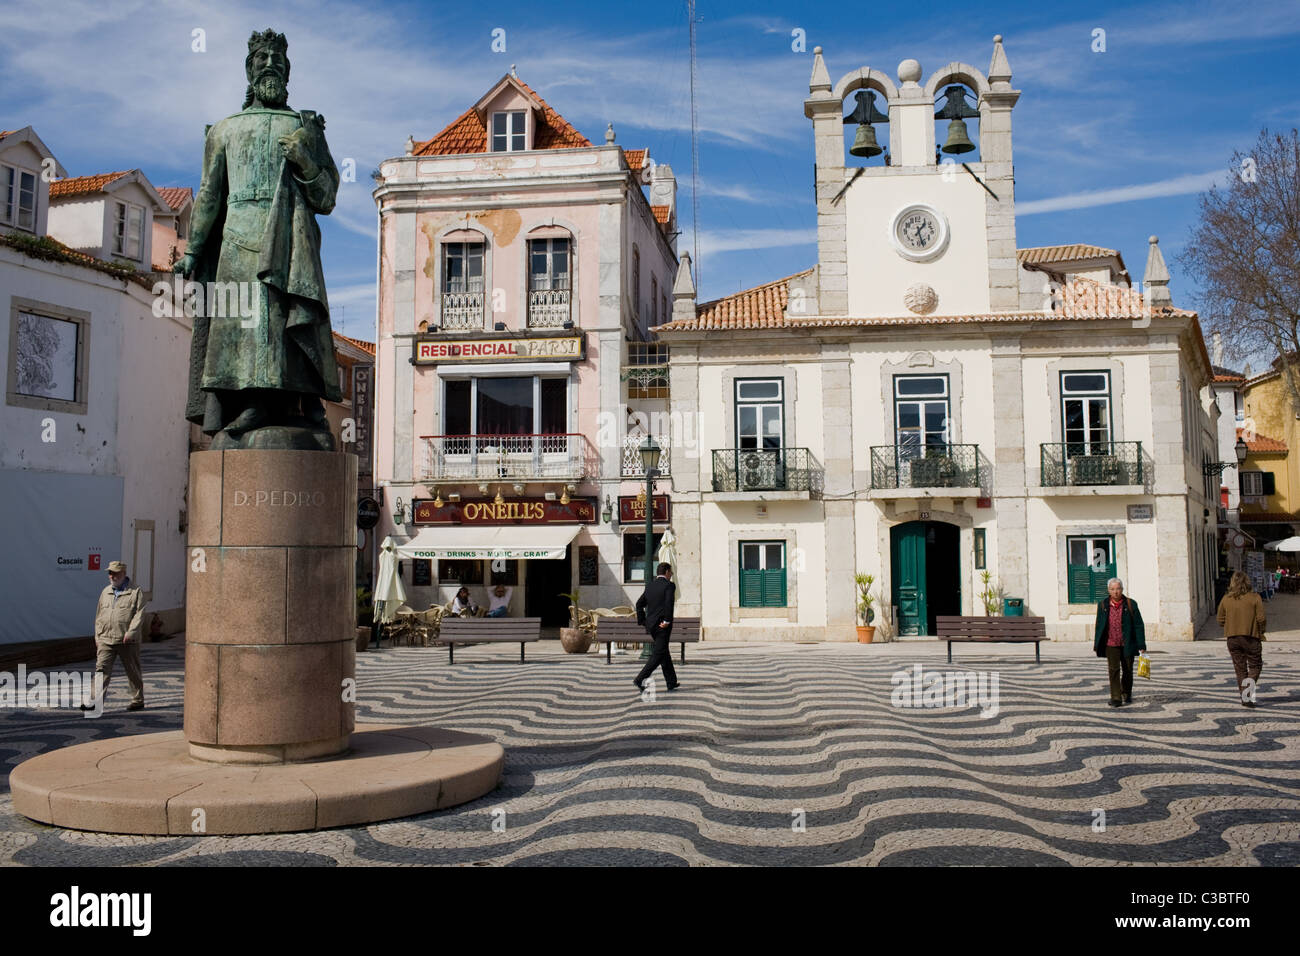 A plaza in Cascais, Portugal, with statue of monarch Dom Pedro I. Stock Photo